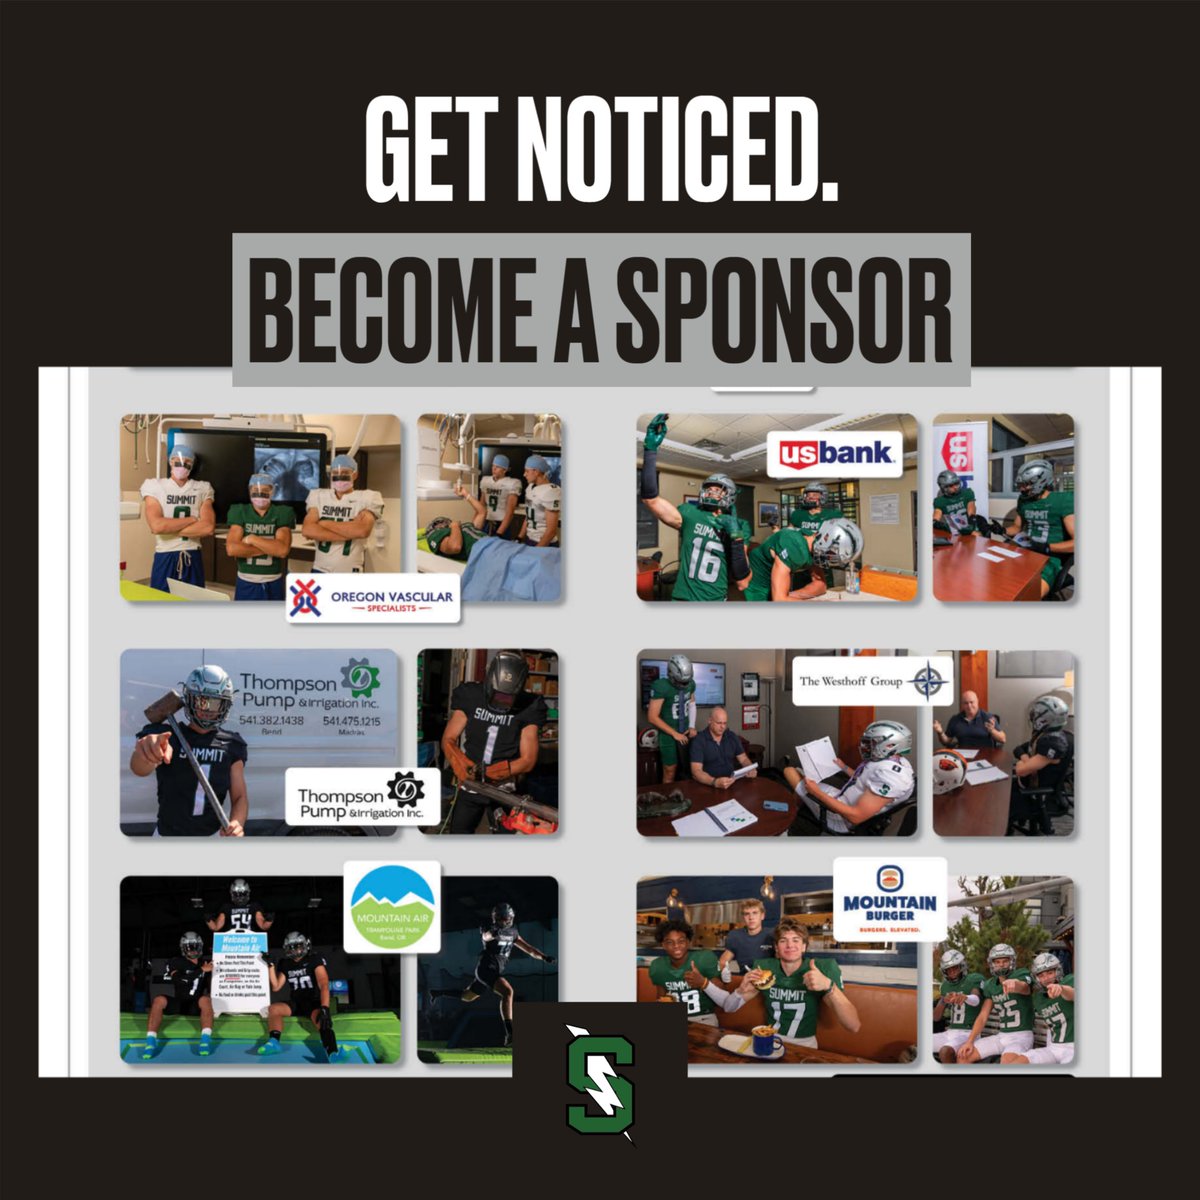 Summit Football is looking for our next group of business sponsors for the 2024 season. If you are interested in learning more, please go to summitstormfootball.com to see all the great options to support the Storm!